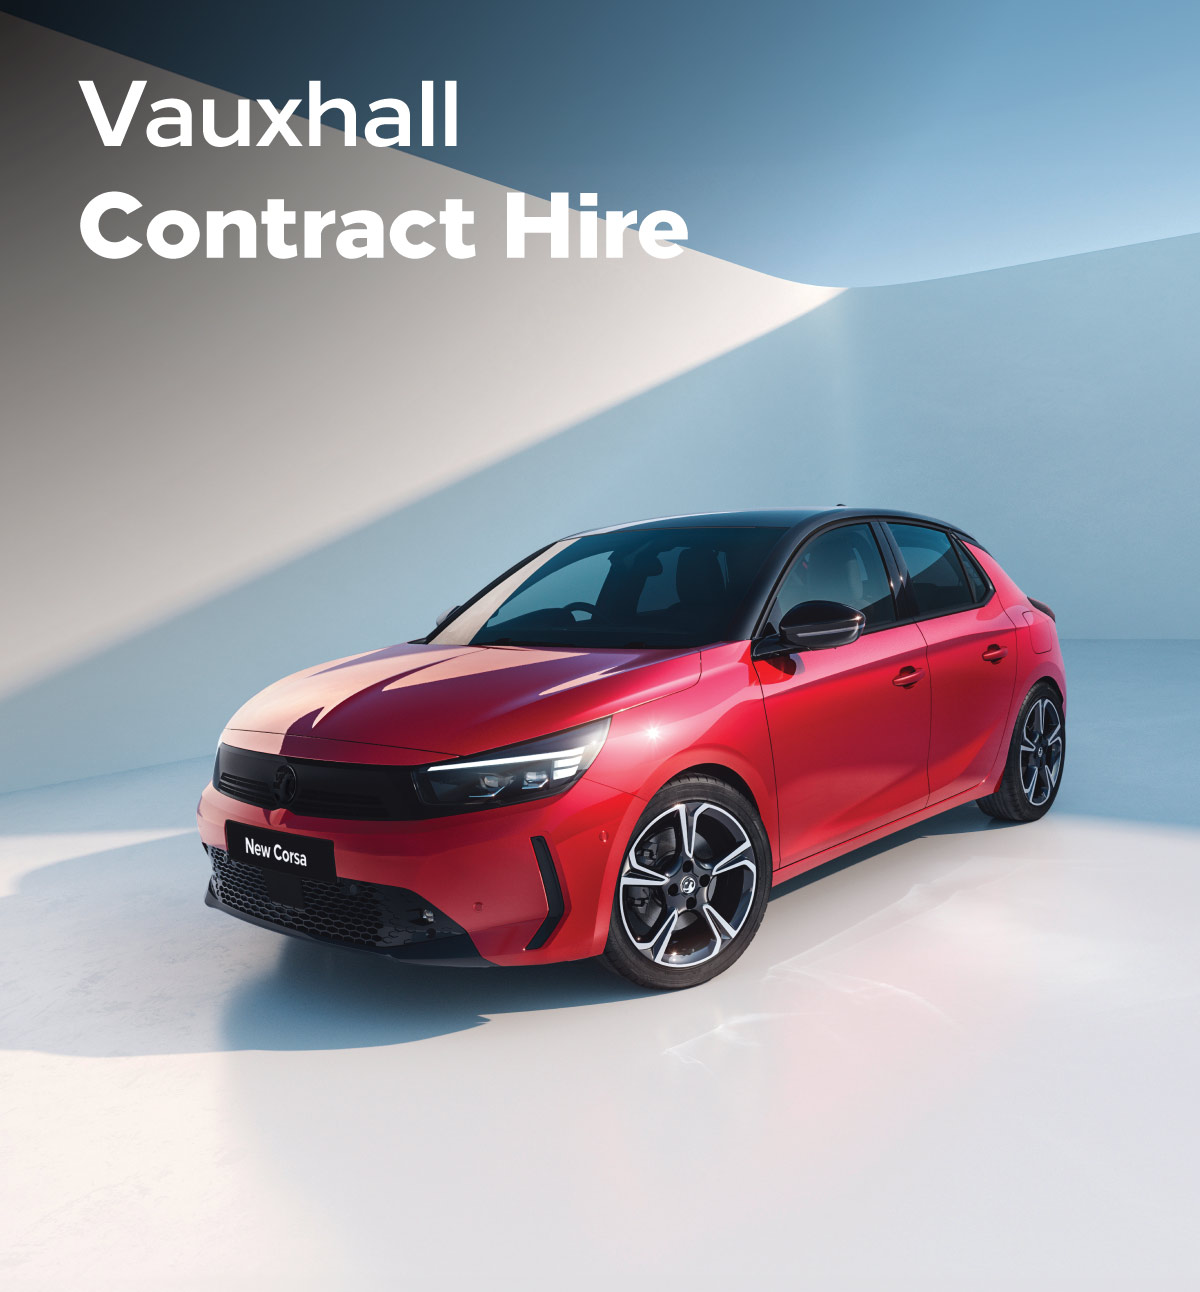 Vauxhall Contract Hire Offers